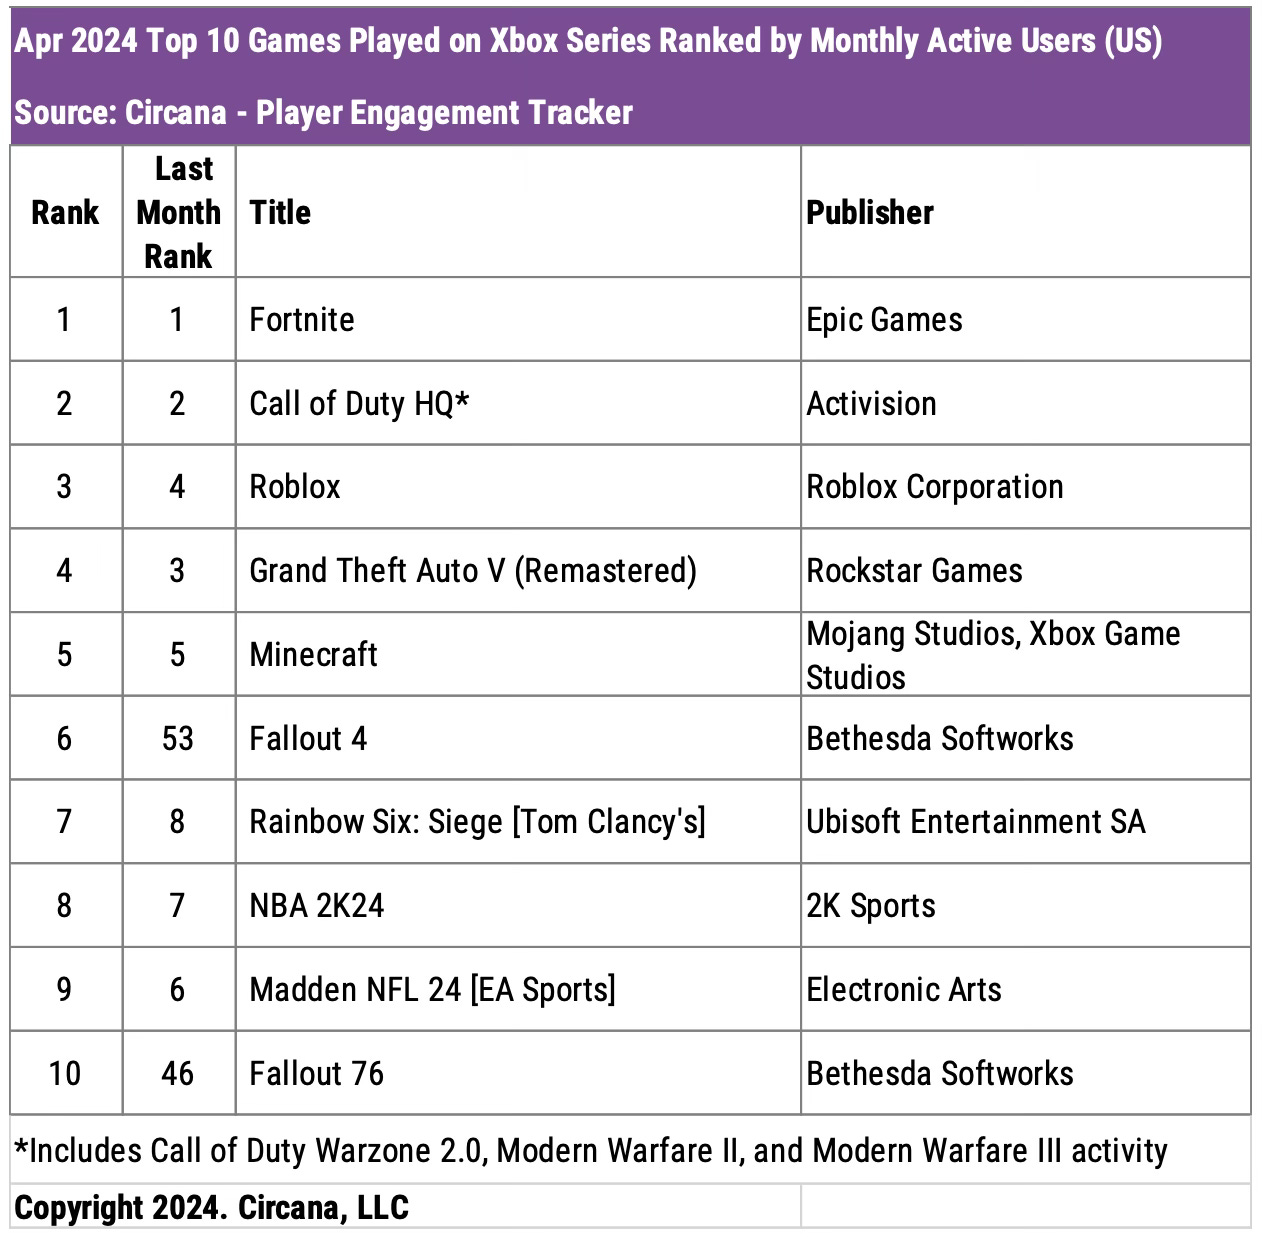 Chart showing the top 10 most-played games on Xbox Series in April 2024 ranked by monthly active users in the U.S.